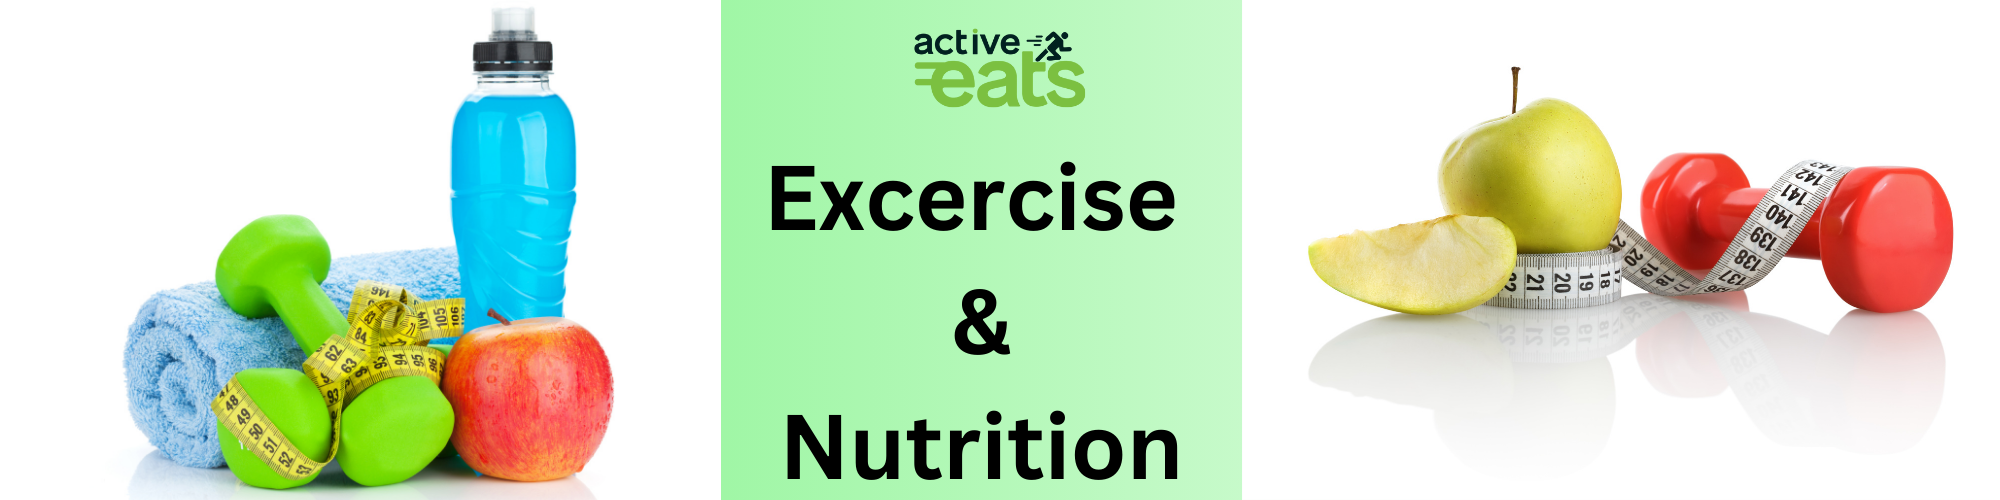 Image shows apple and energy drinks and energy drinks on one side of image and another green apple with dumbbell on other side with text written in between image: "Exercise and Nutrition"